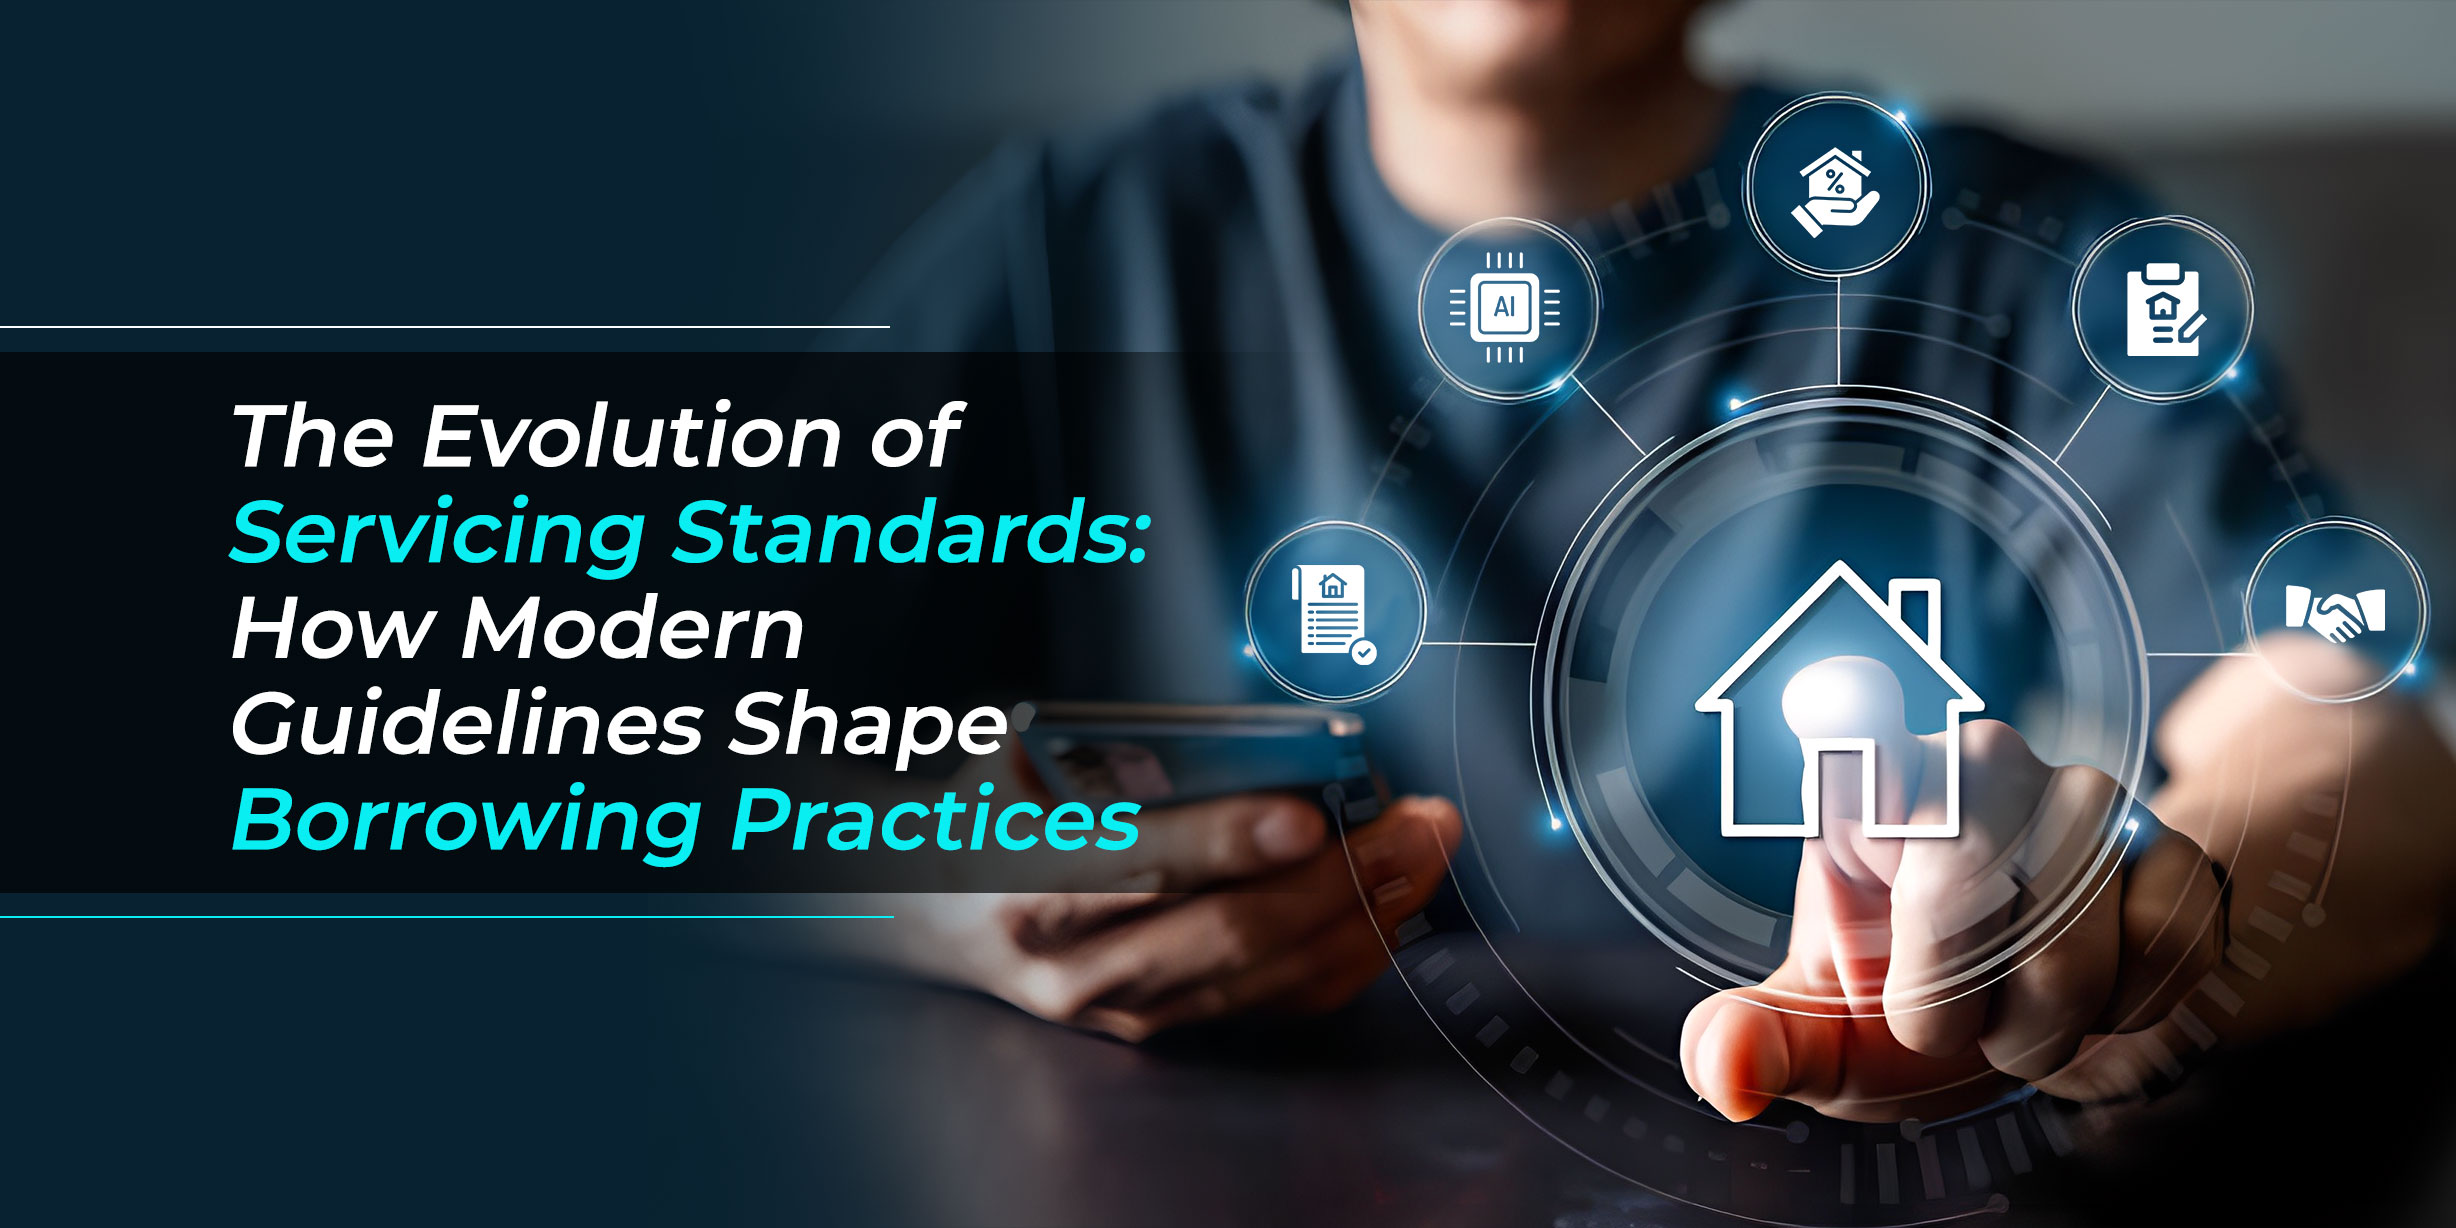 The Evolution of Servicing Standards: How Modern Guidelines Shape Borrowing Practices